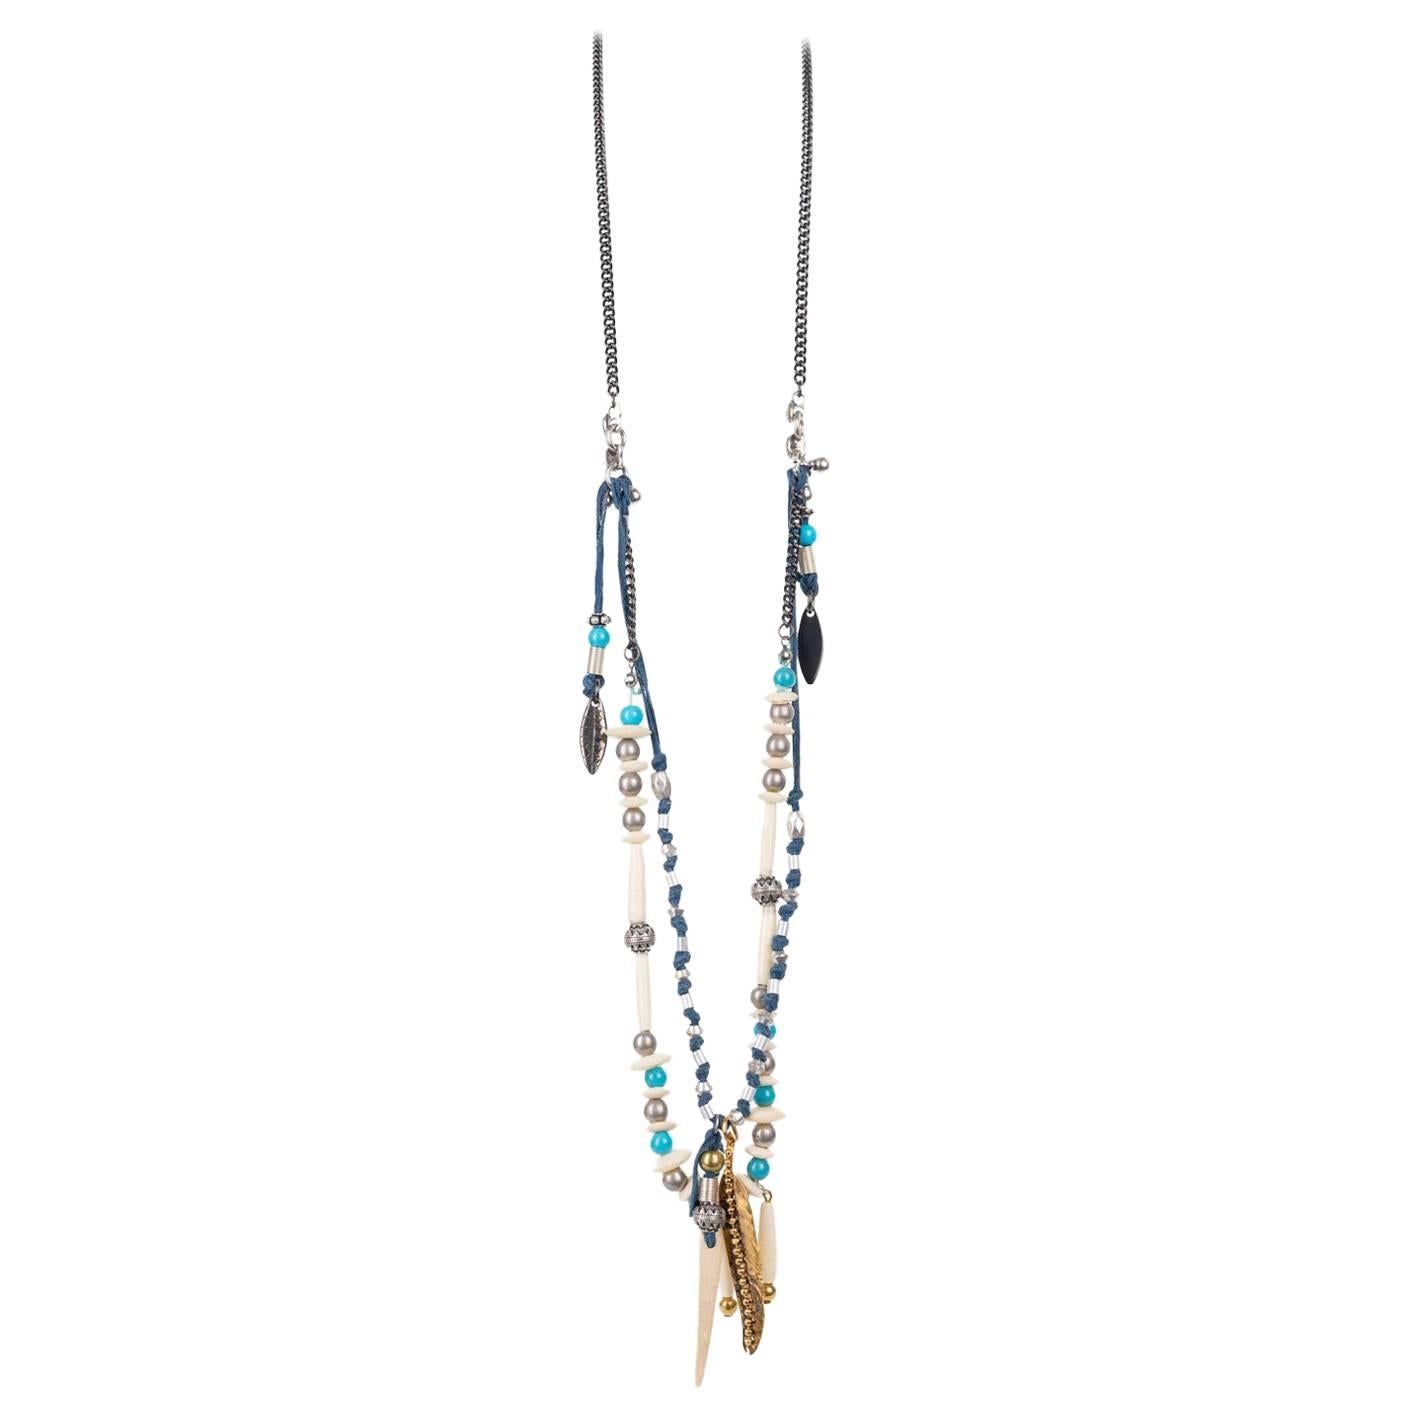 Roberto Cavalli Blue Tribal Feather Beaded Applique Necklace For Sale